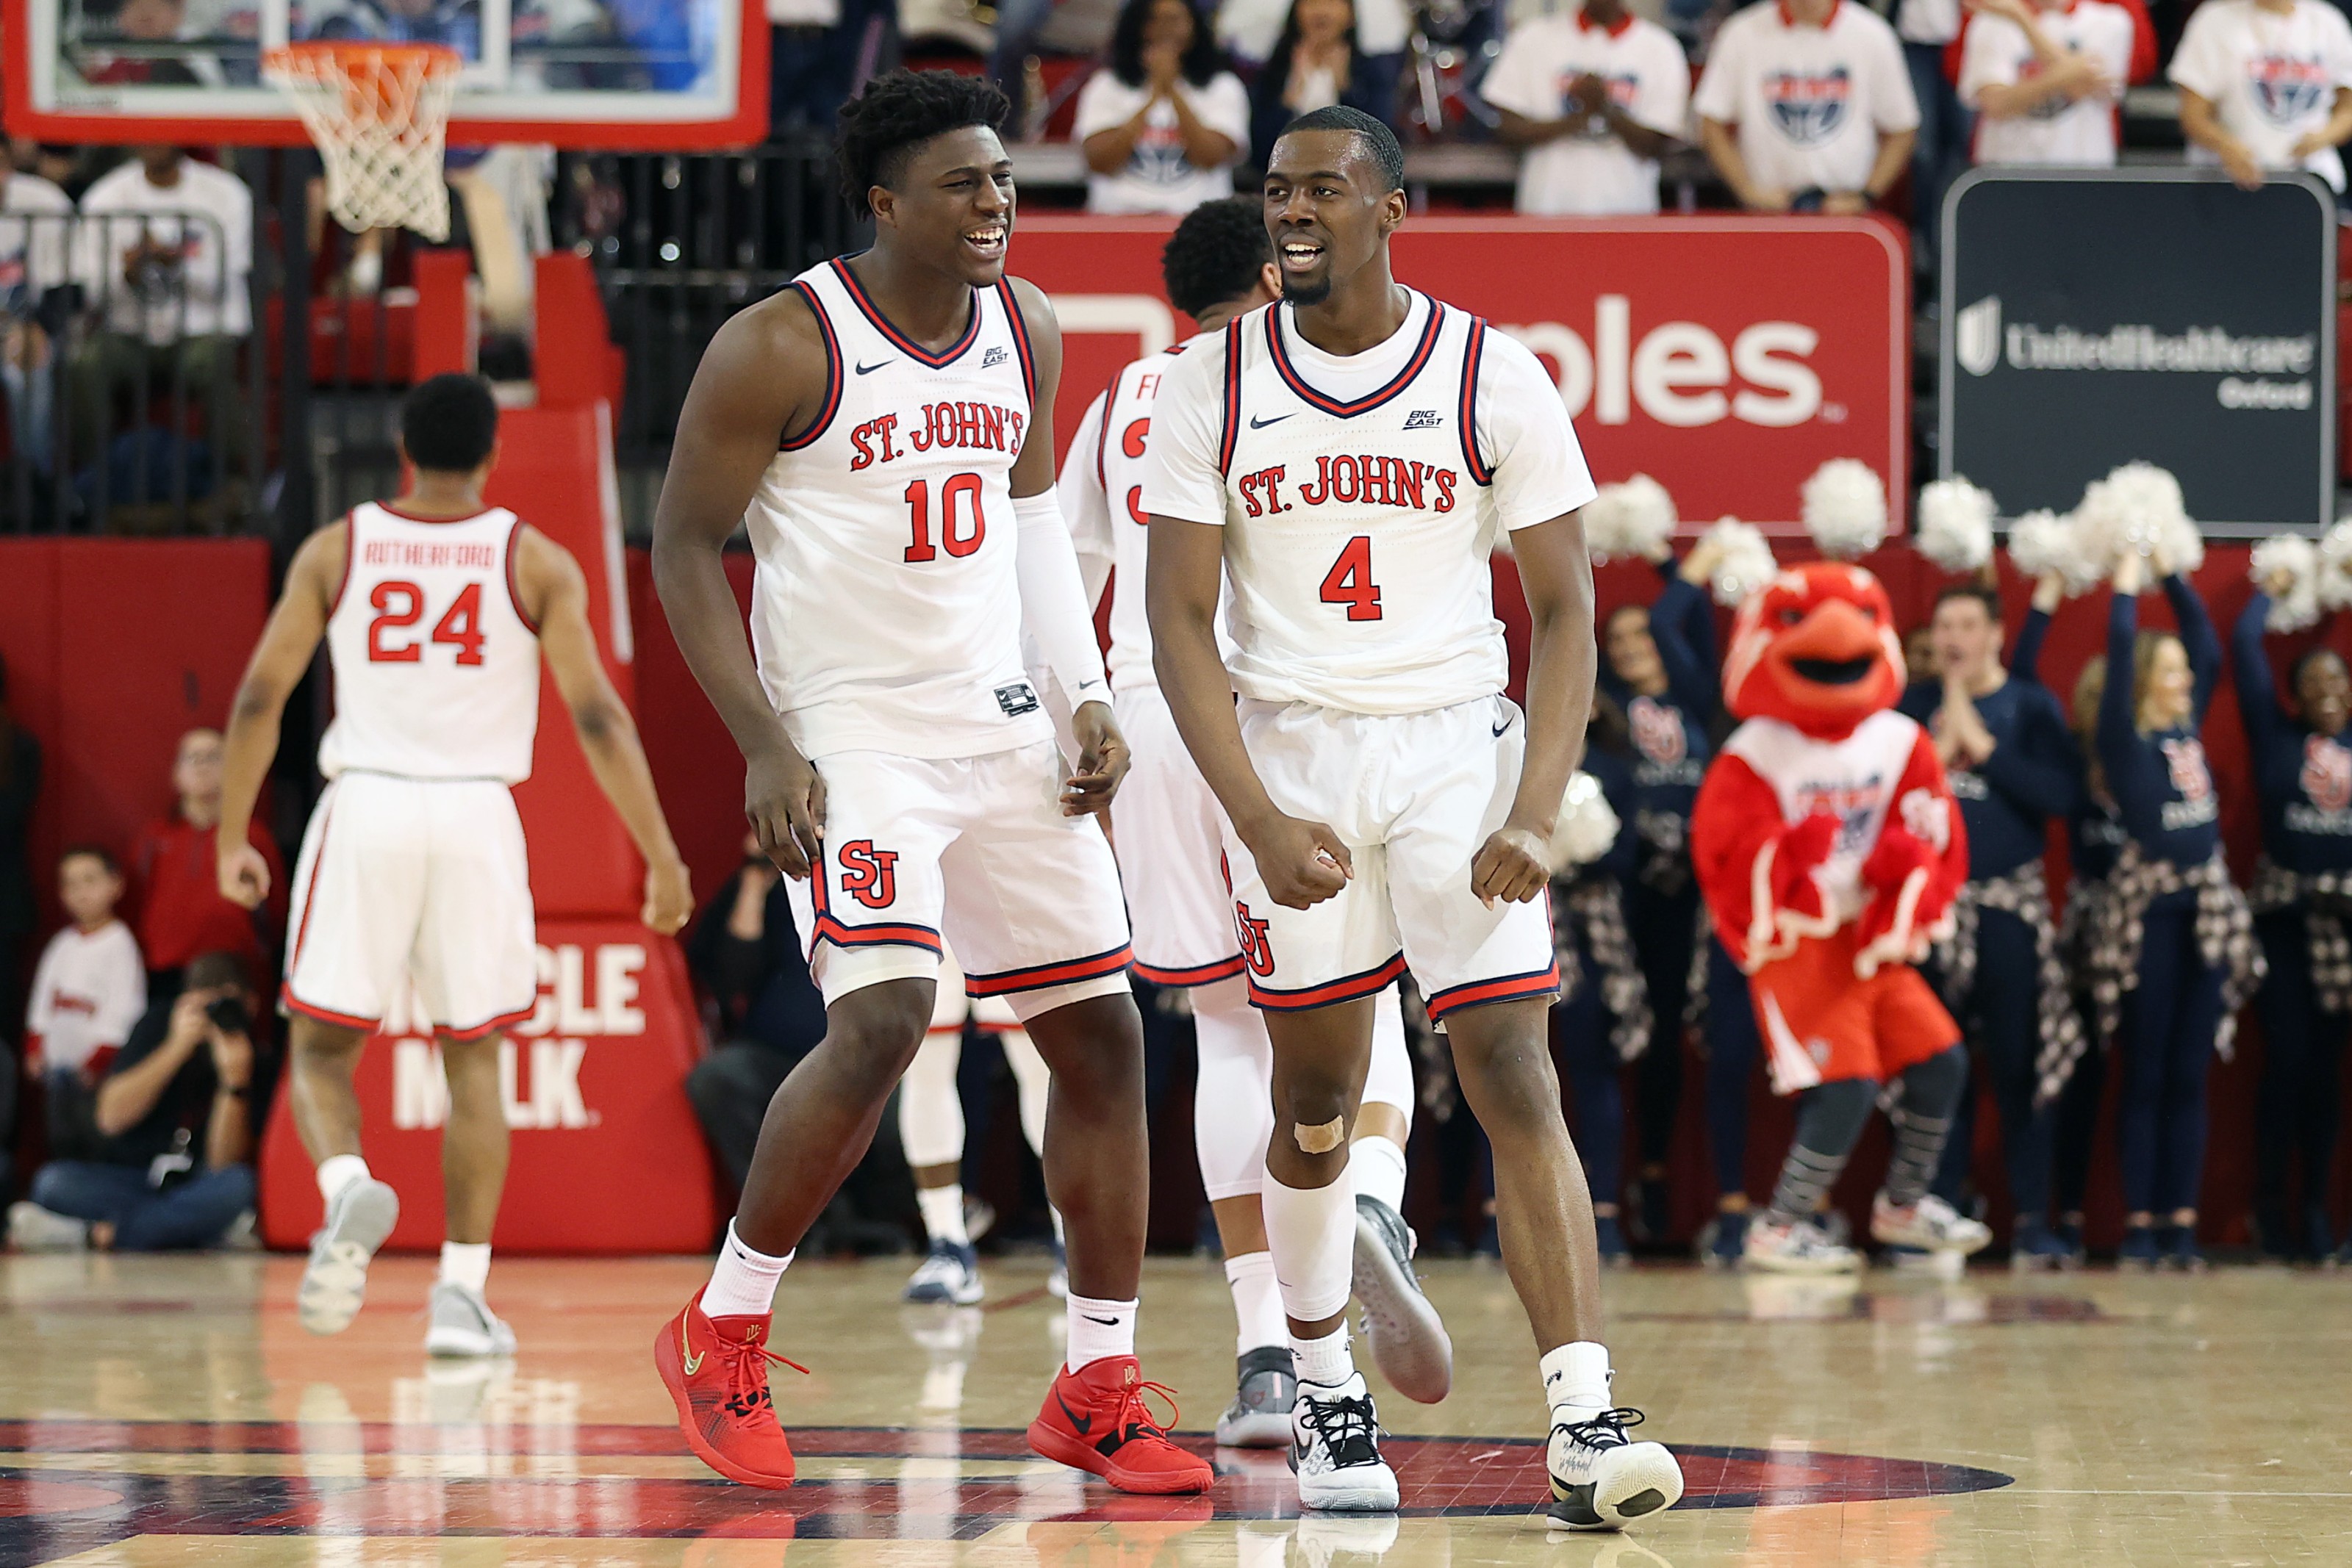 St. John’s basketball year in review Top5 moments in 2020